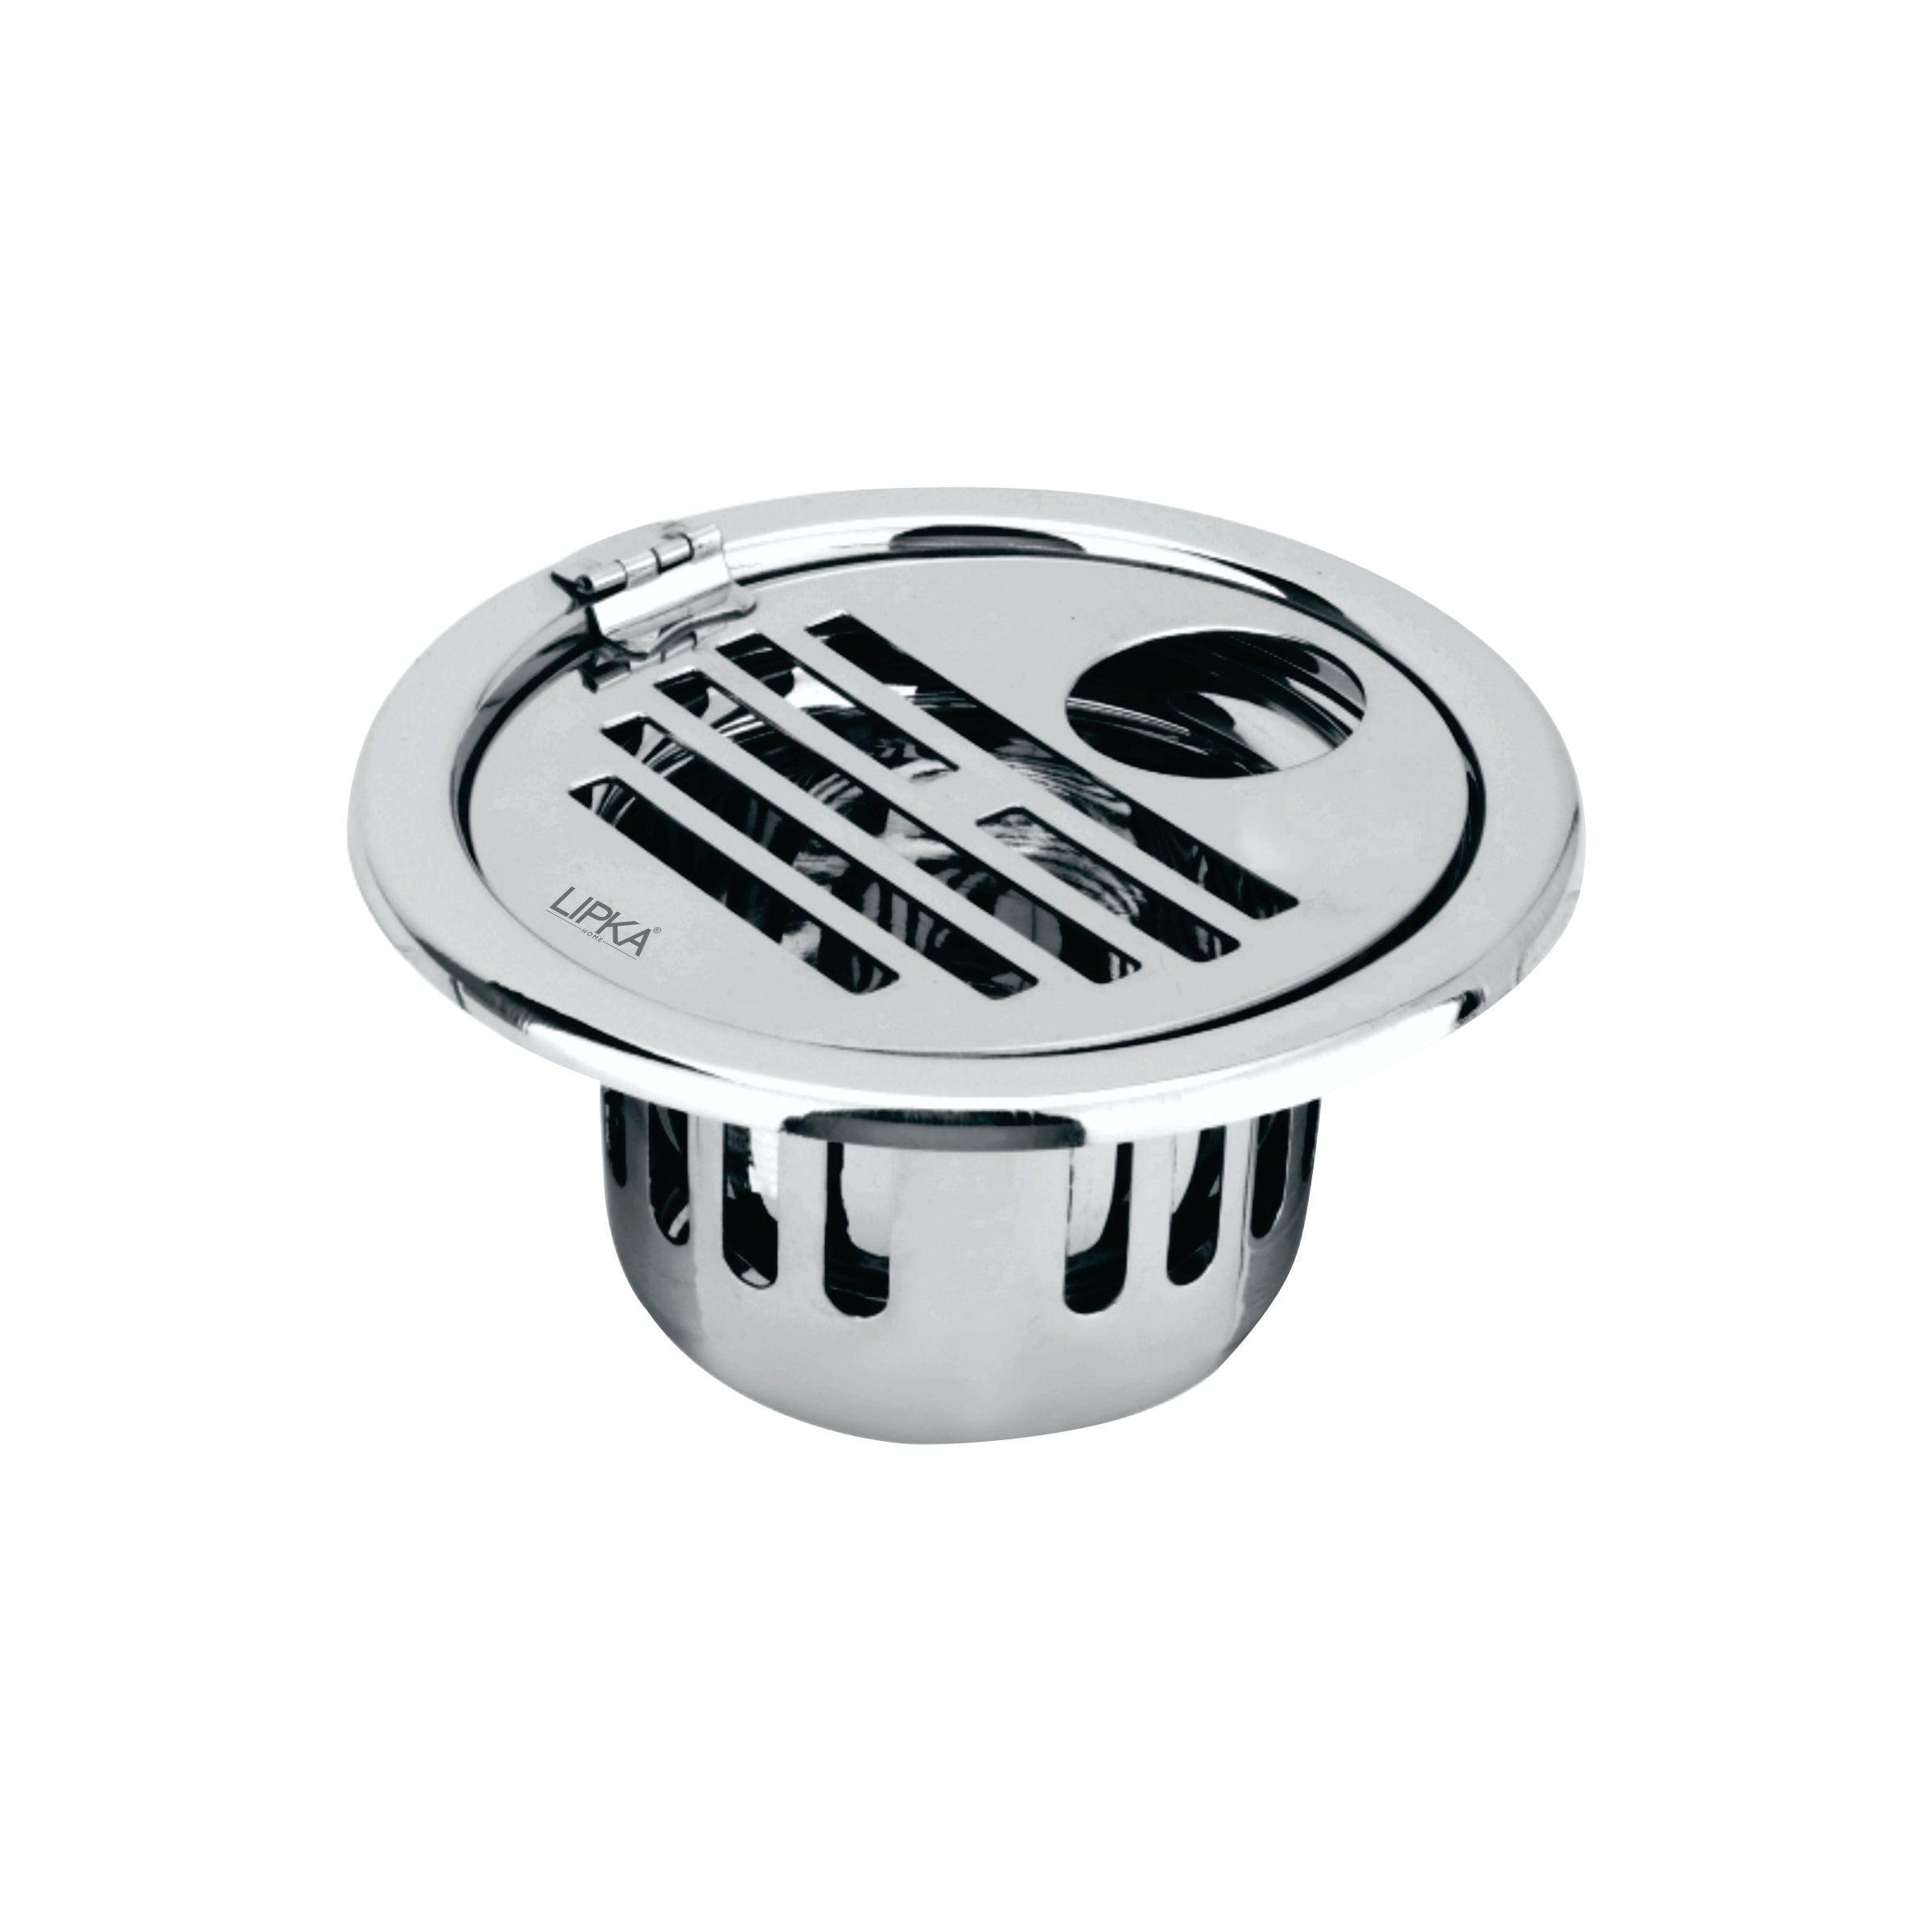 Golden Classic Jali Round Floor Drain (5 Inches) with Hinge, Hole and Cockroach Trap